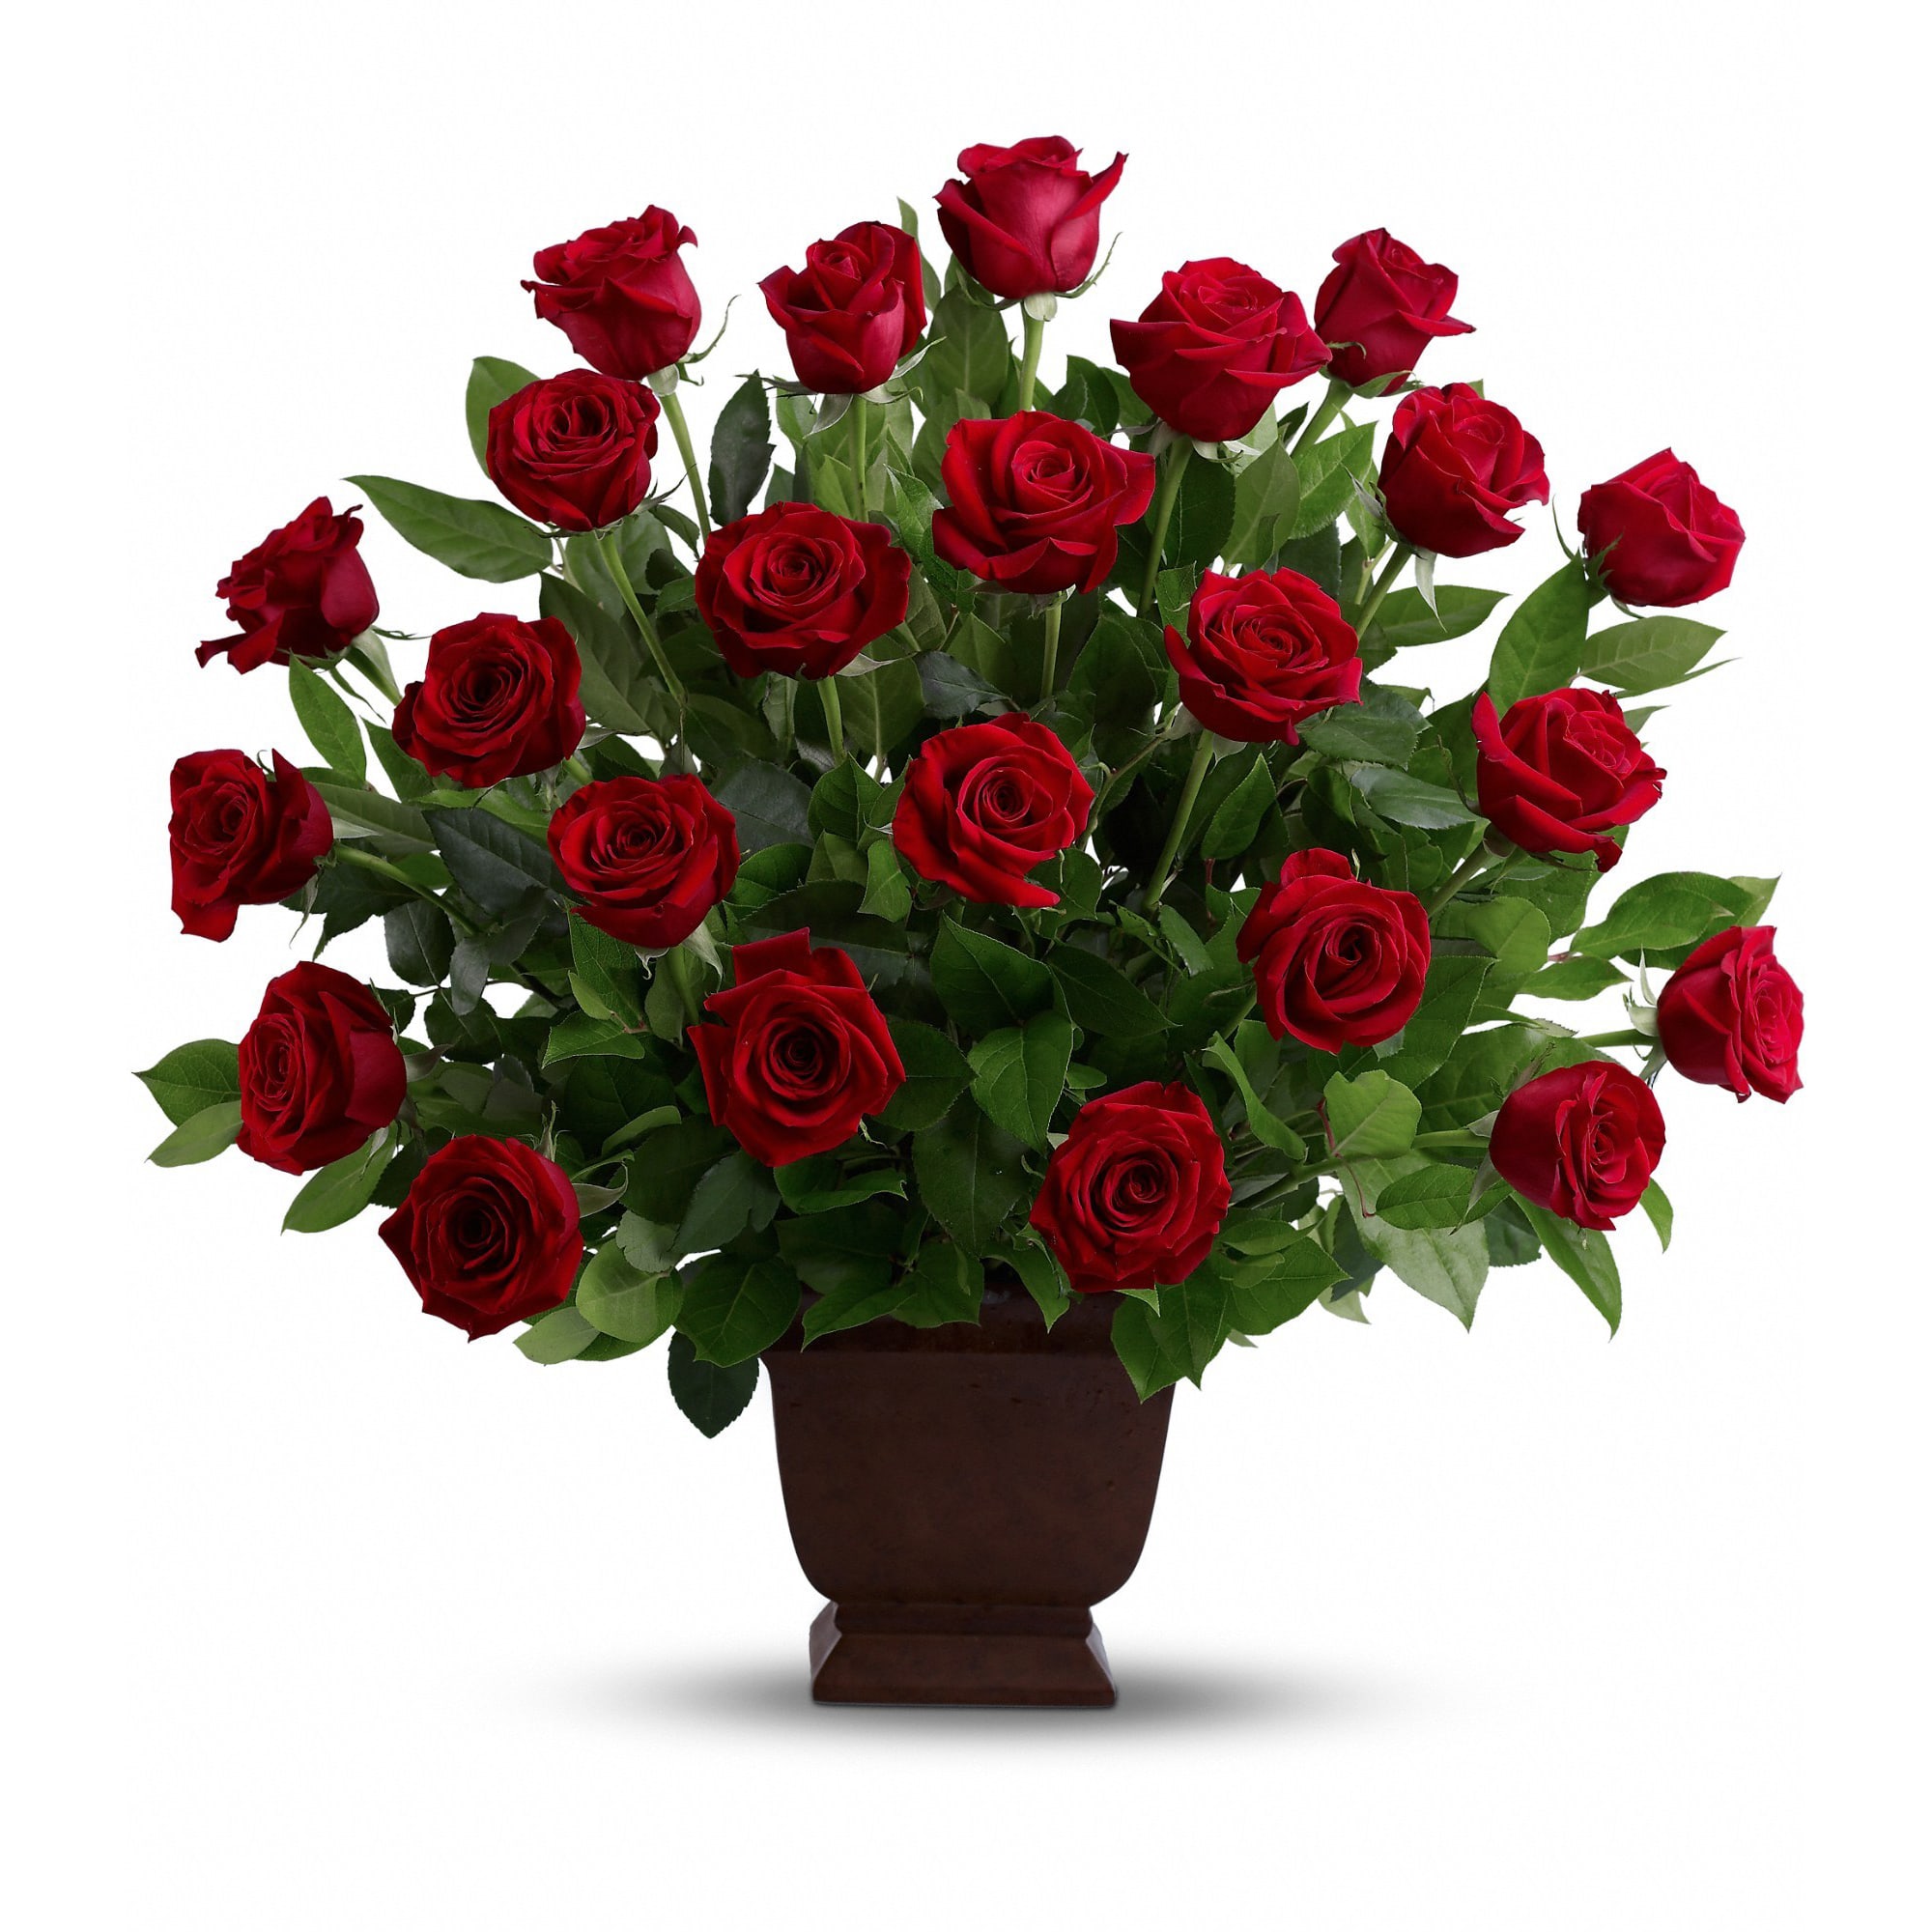 Teleflora's Rose Tribute - Two dozen traditional, ruby-red roses arranged in a classic urn will create an outstanding show of respect for a beloved friend, family member or business associate. An appropriate and timeless gesture of affection and dedication.  Two dozen red roses – accented with greenery – are arranged in a Teleflora Noble Heritage urn.  Approximately 24&quot; (W) x 27&quot; (H)  Orientation: One-Sided      As Shown : TFWEB550  